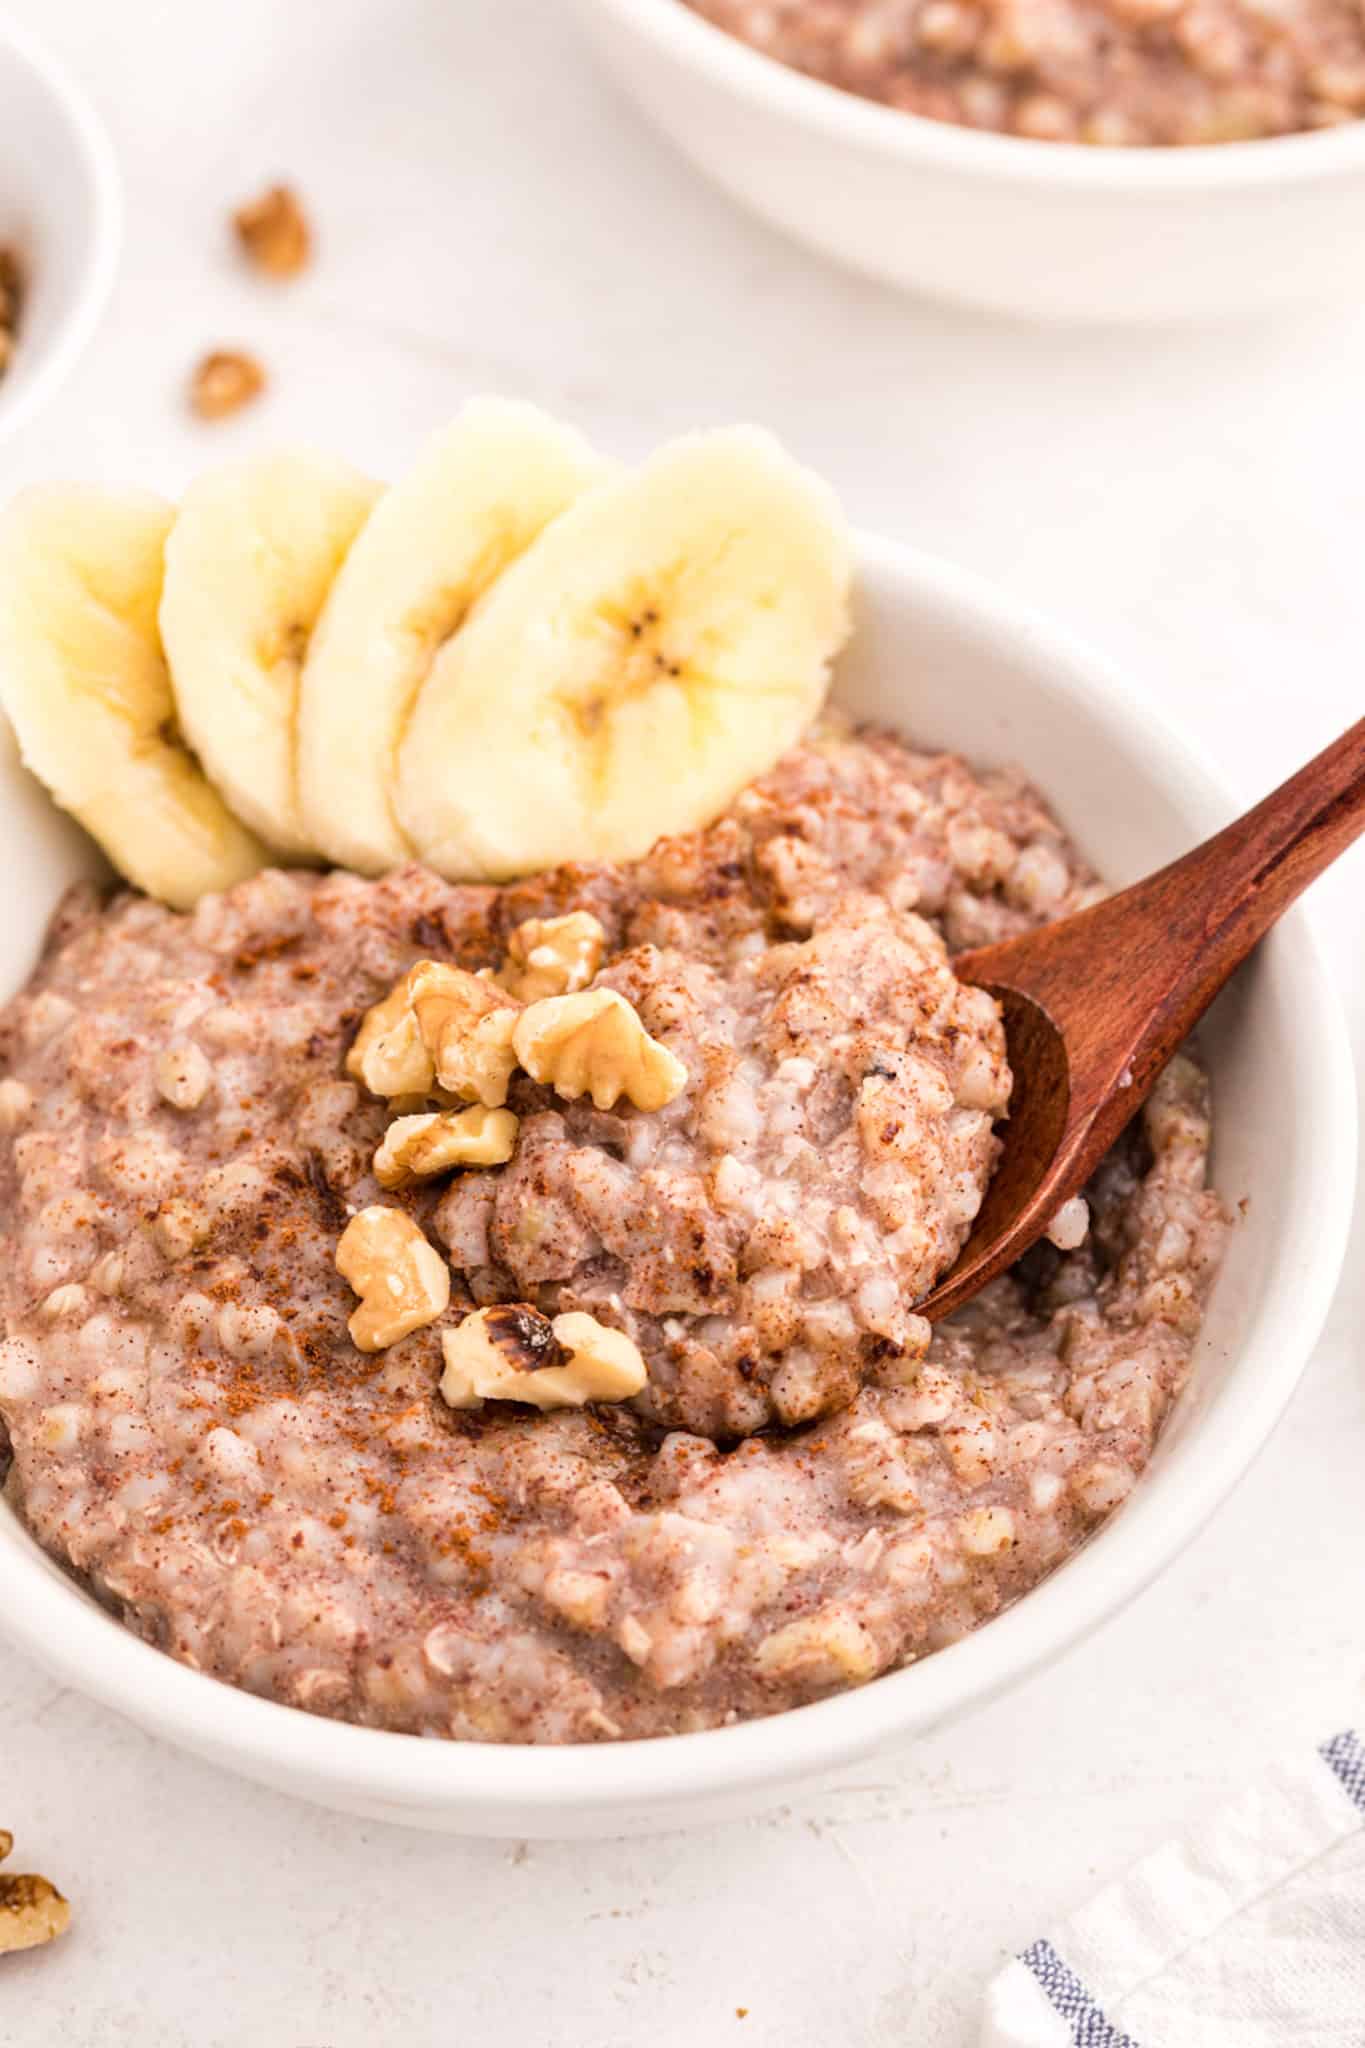 buckwheat porridge in a bowl with sliced bananas and walnuts.